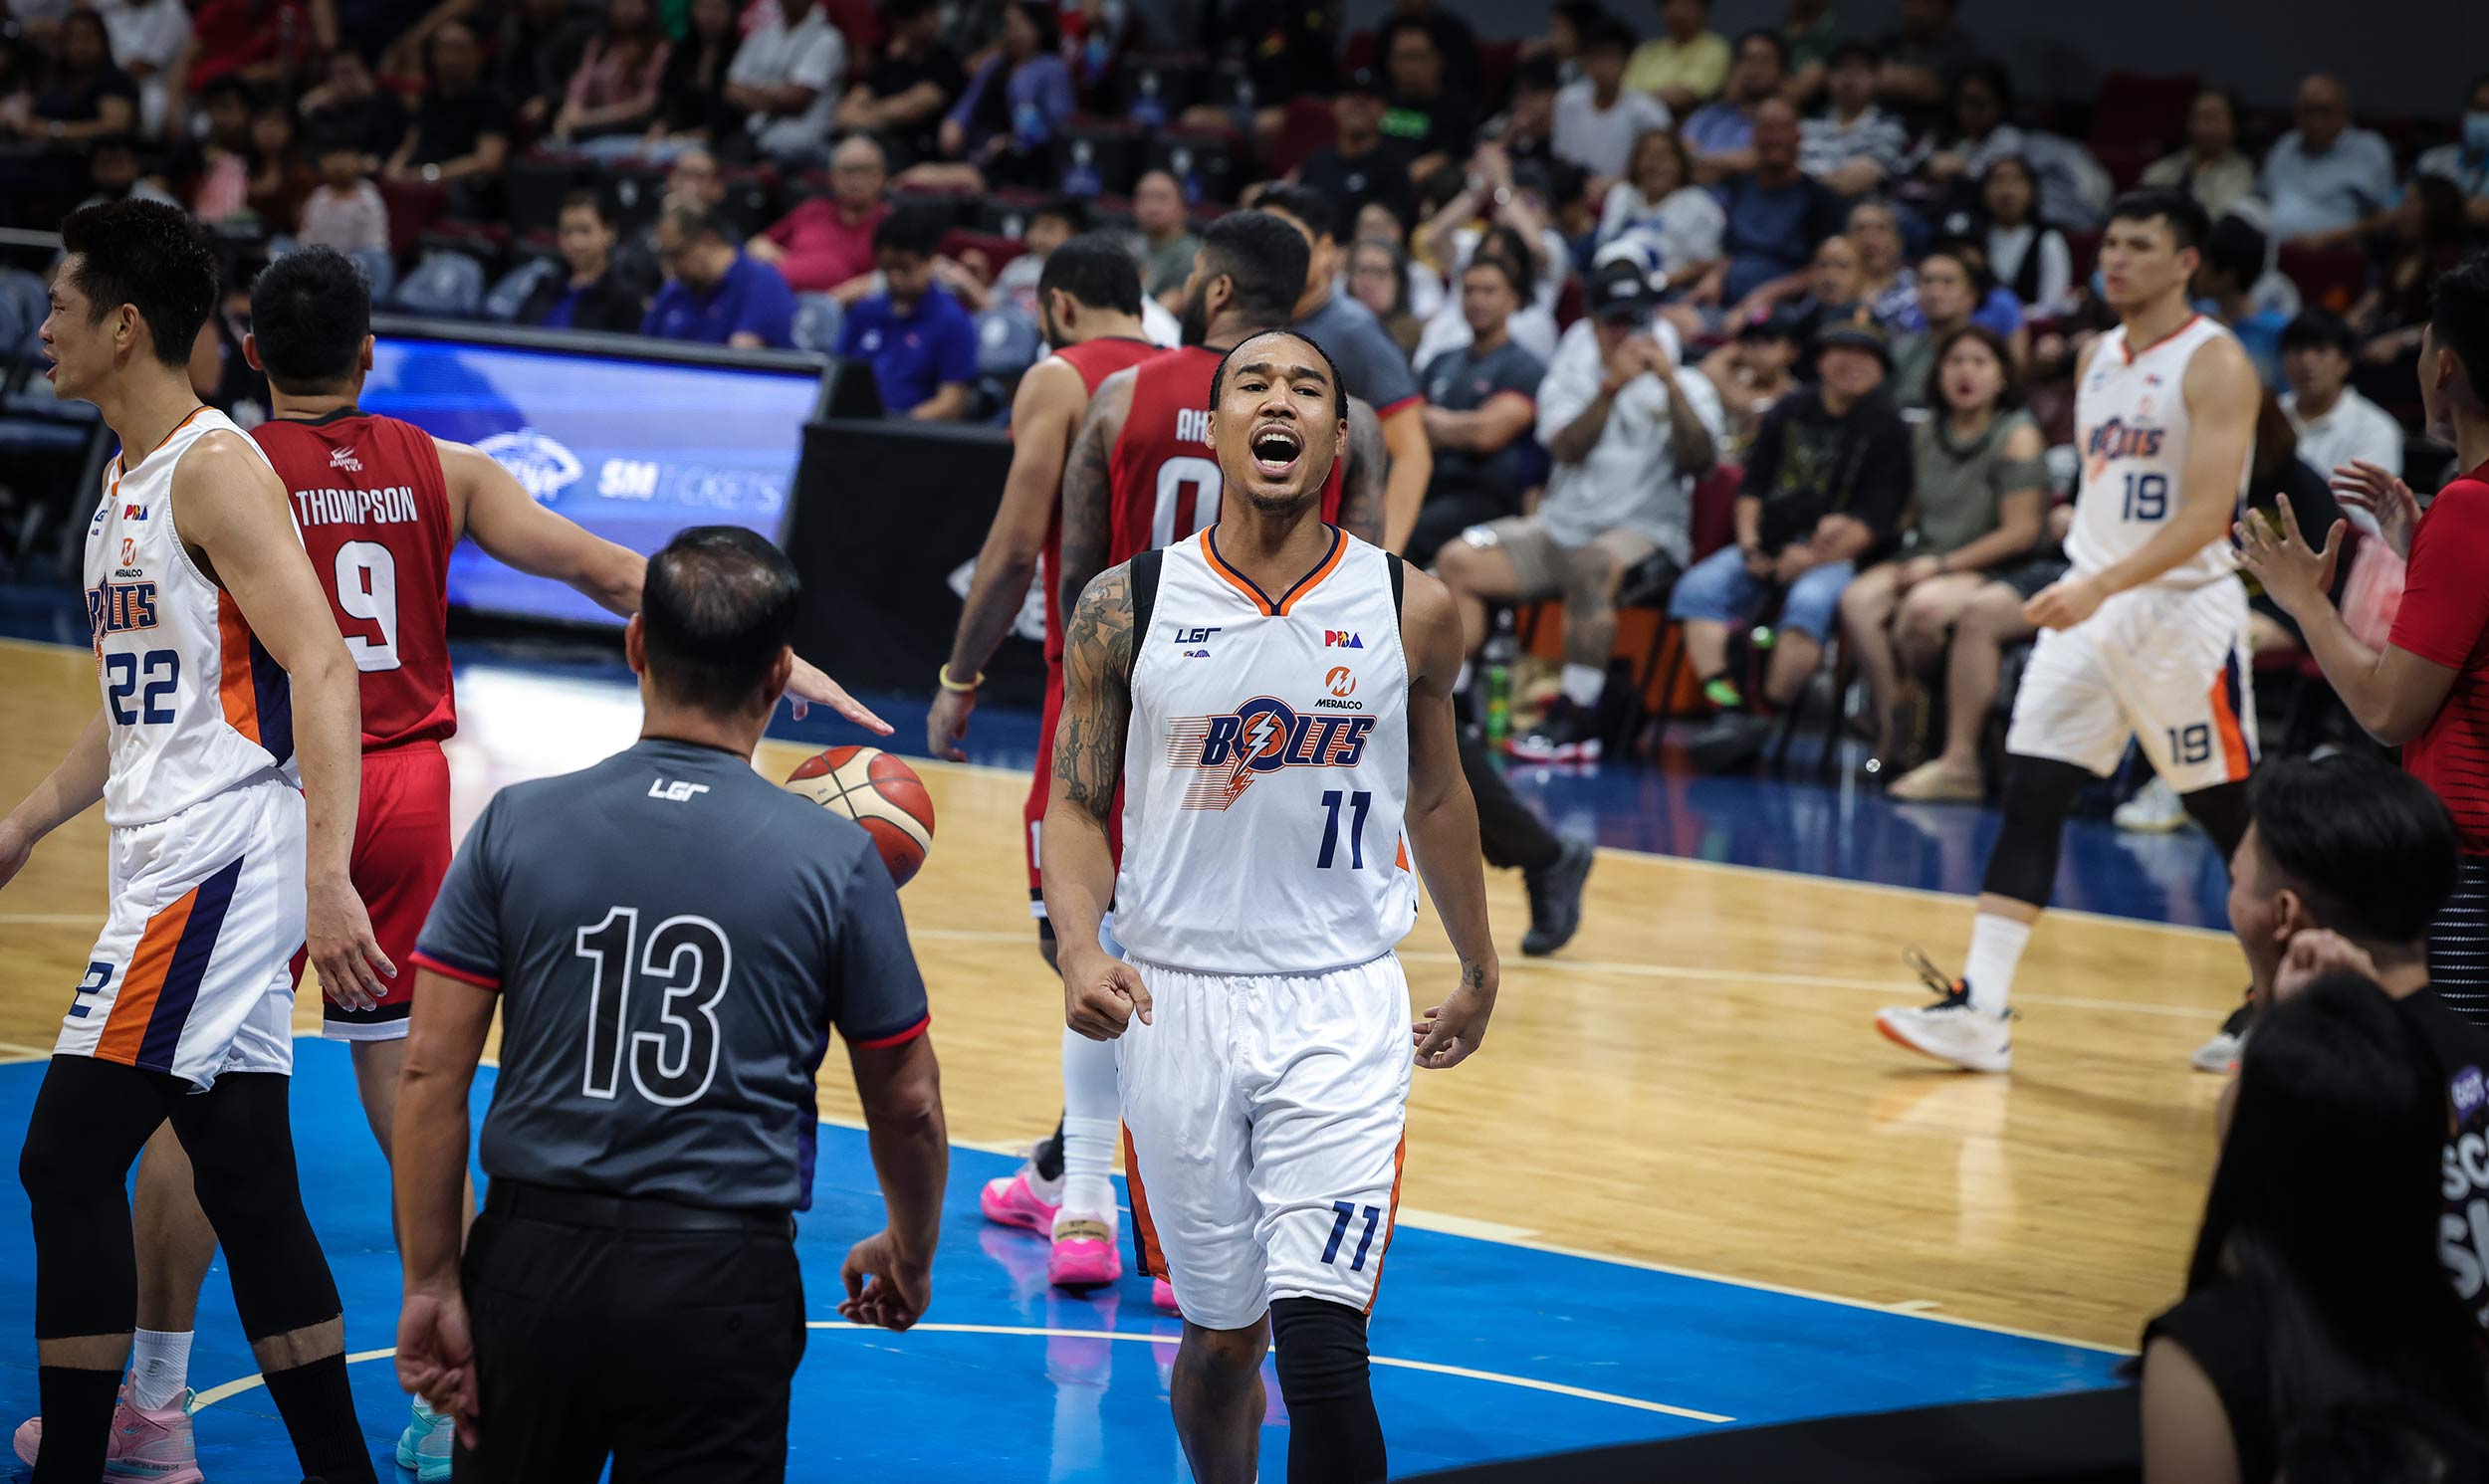 Meralco Bolts' Chris Newsome during a PBA Philippine Cup game against Ginebra Gin Kings